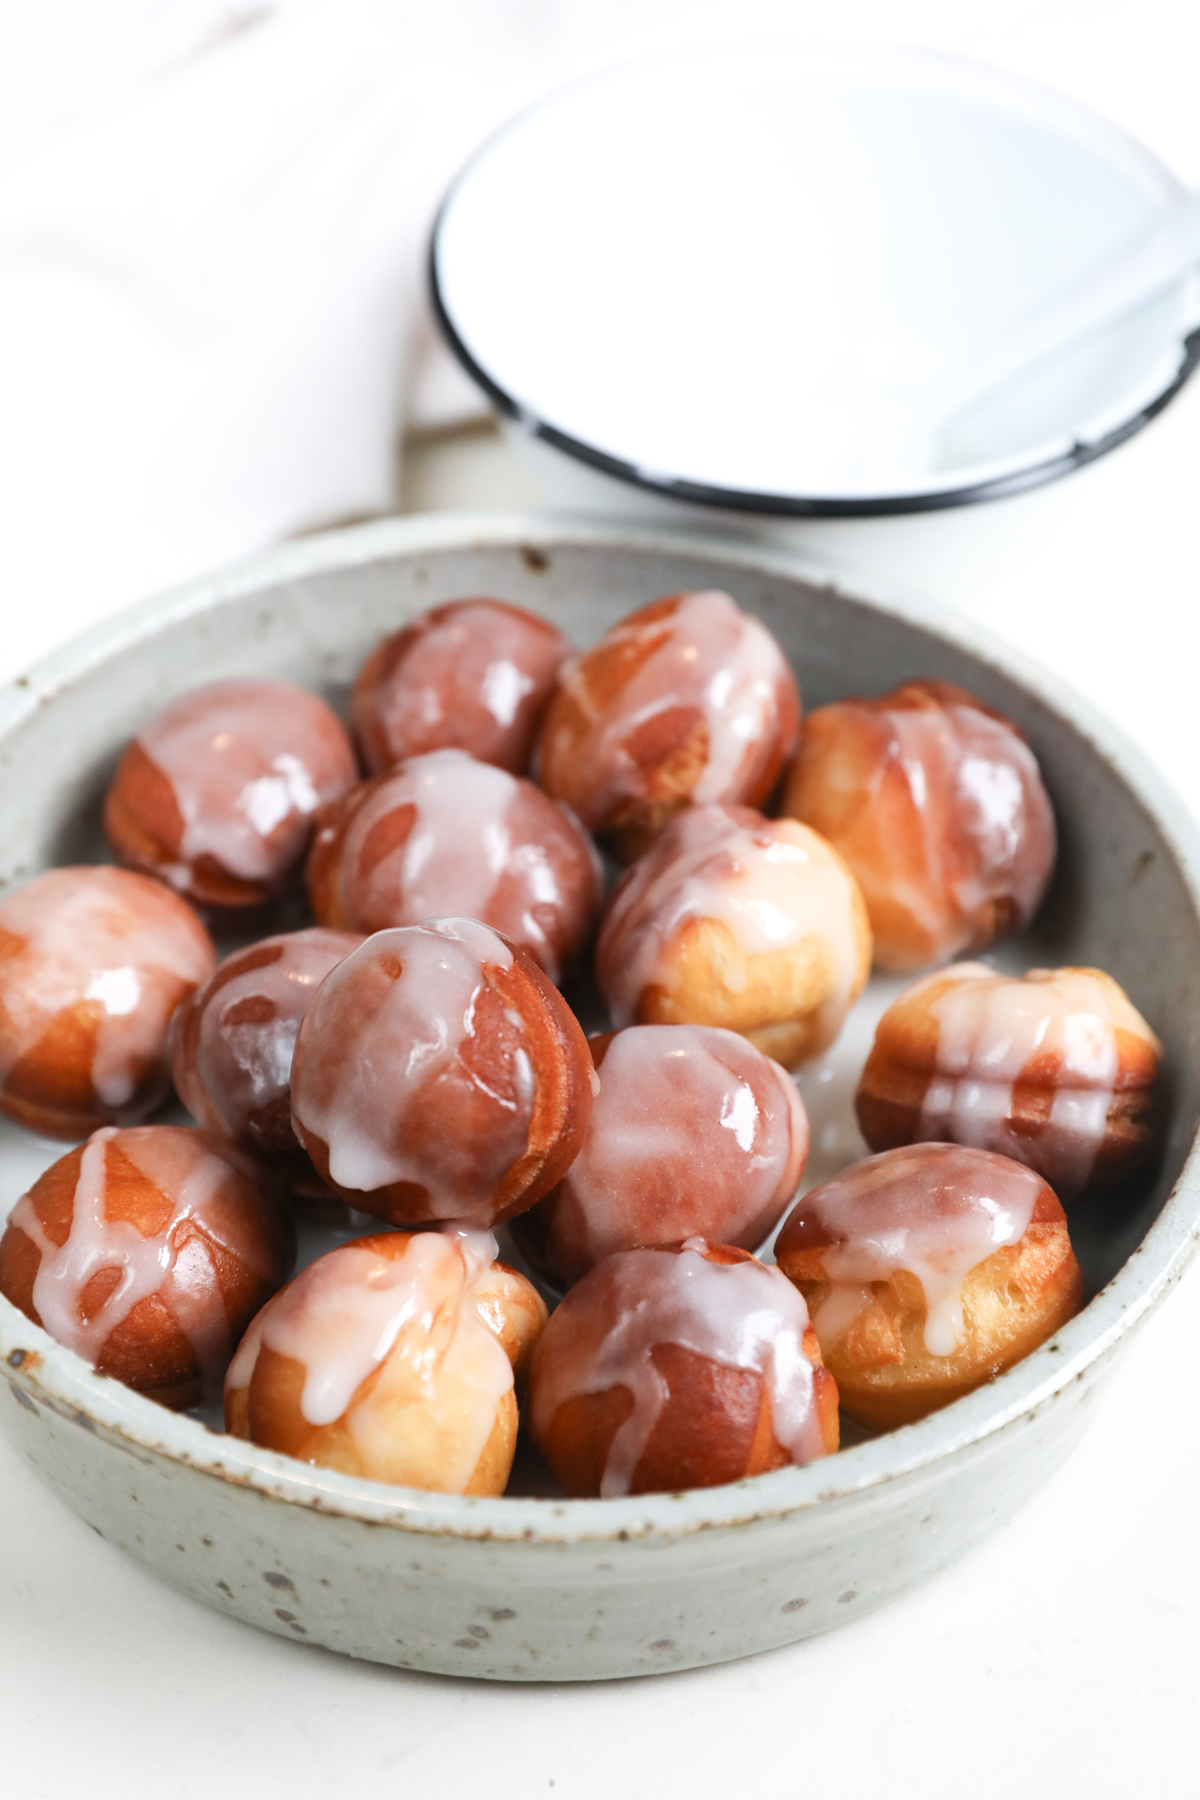 donuts with glace icing